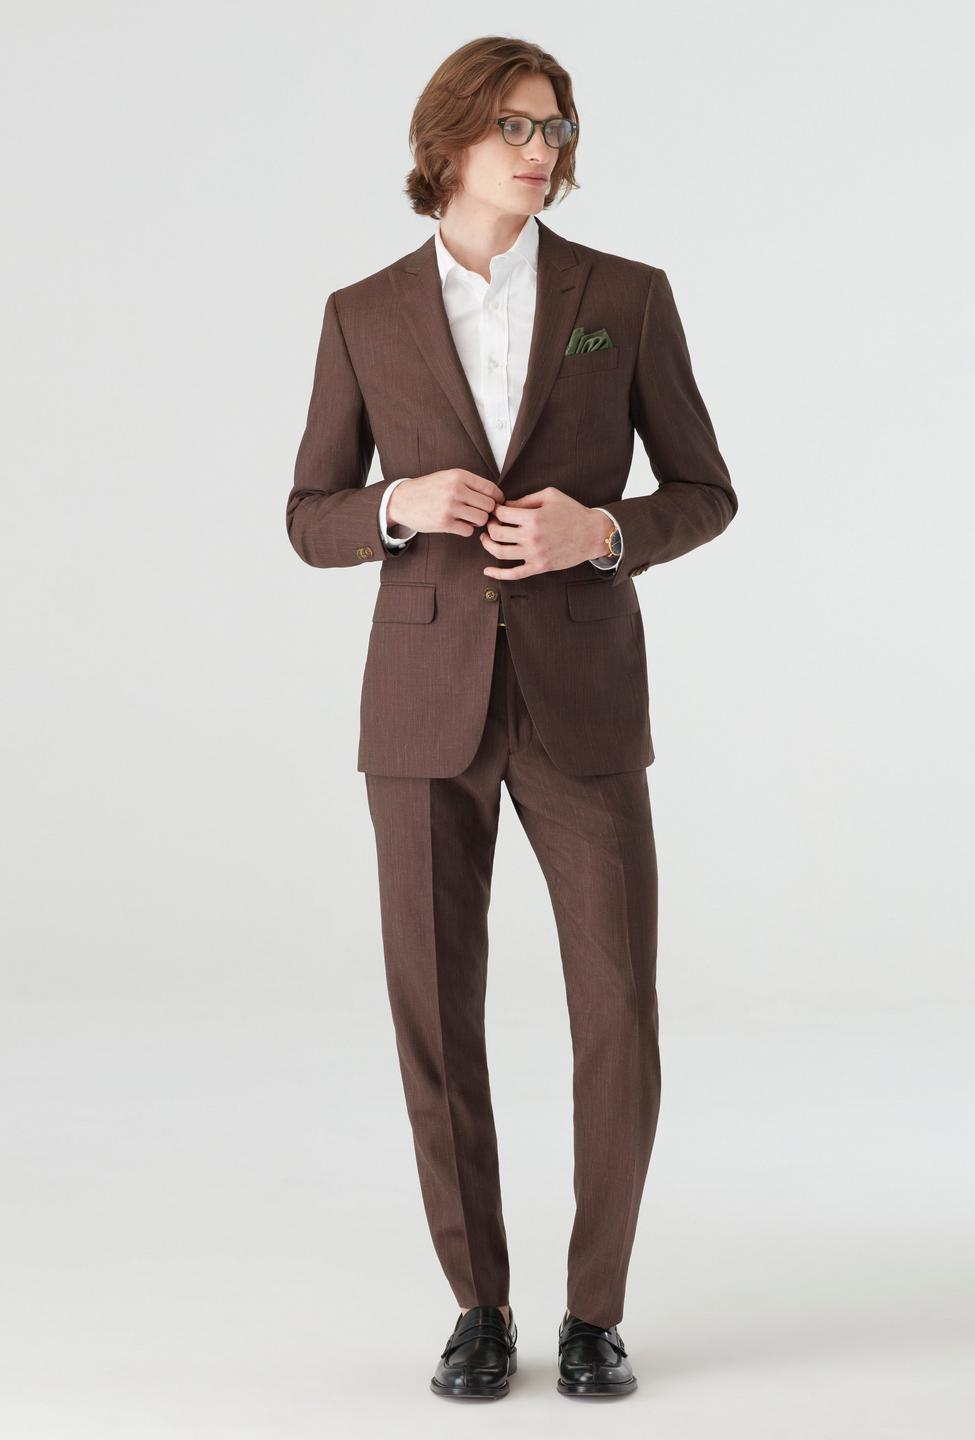 Brown suit - Solid Design from Seasonal Indochino Collection